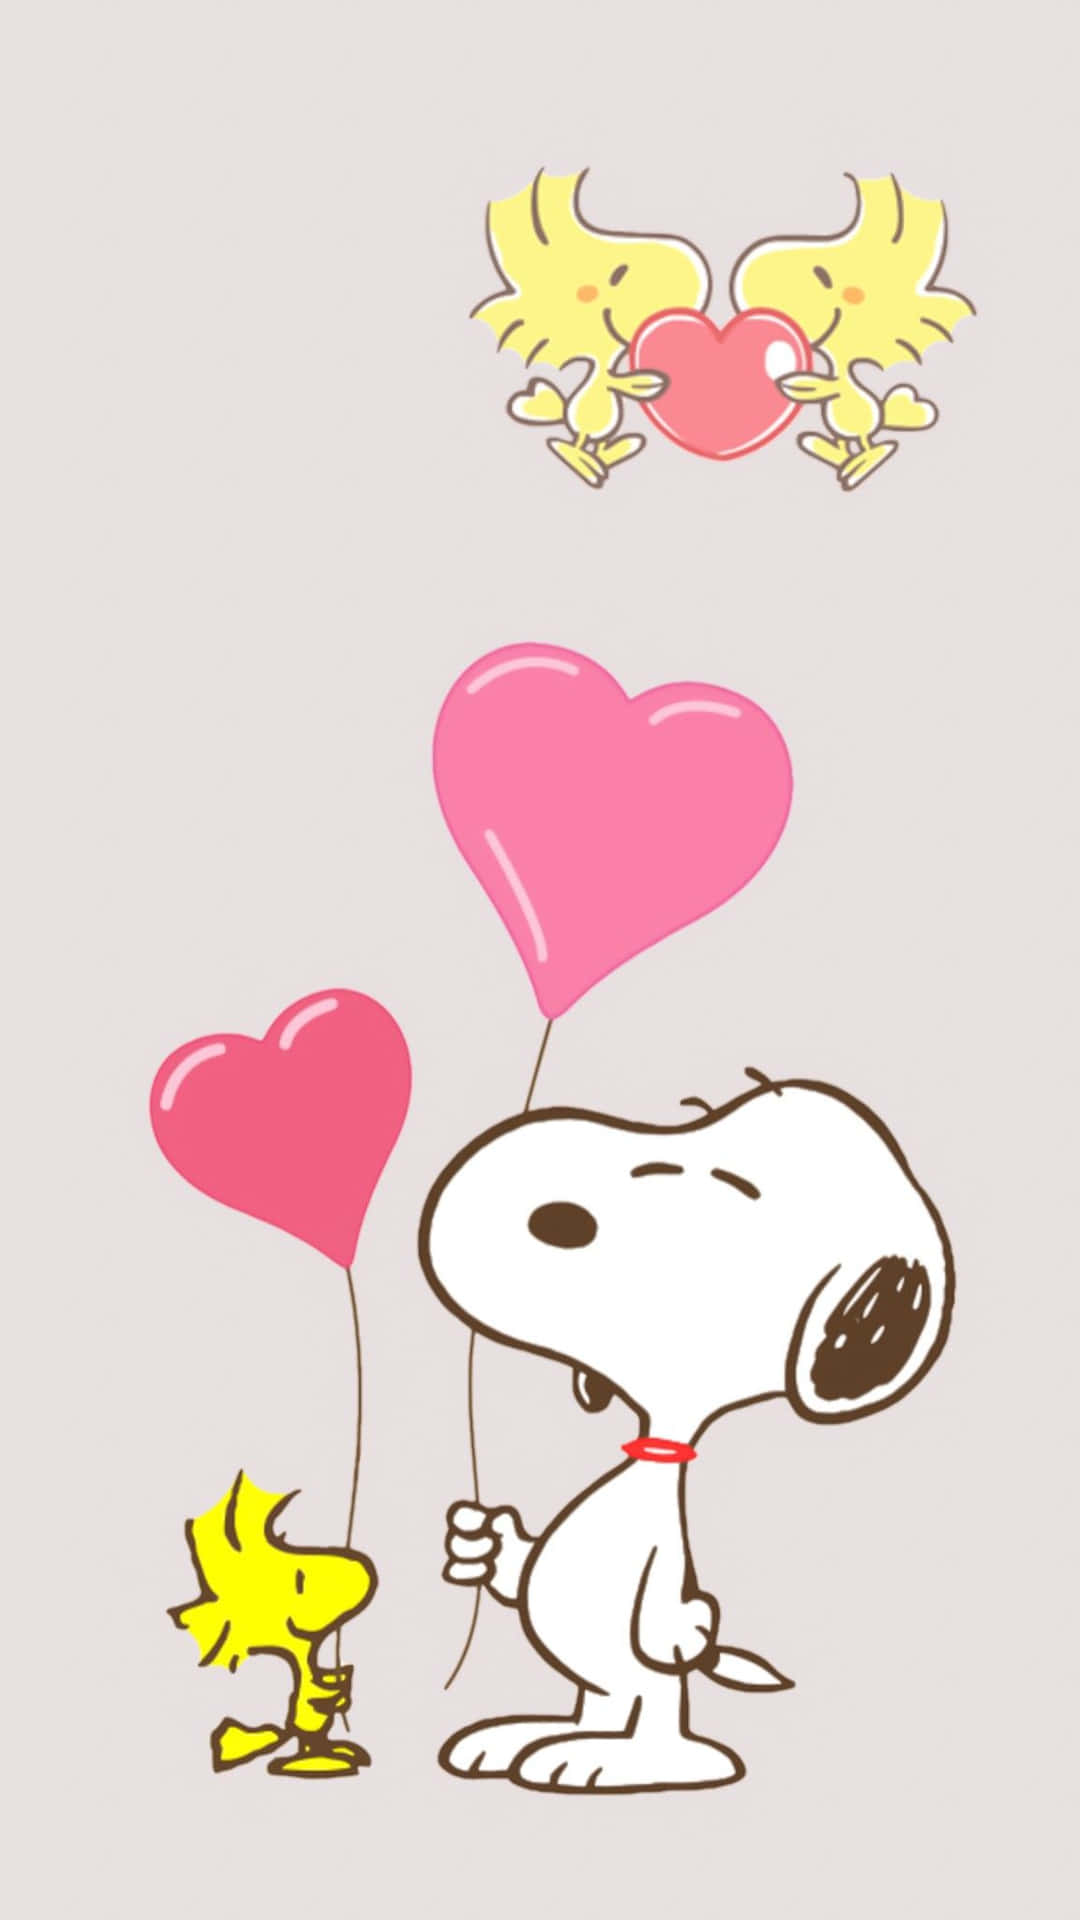 Snoopy And A Bird Holding Balloons